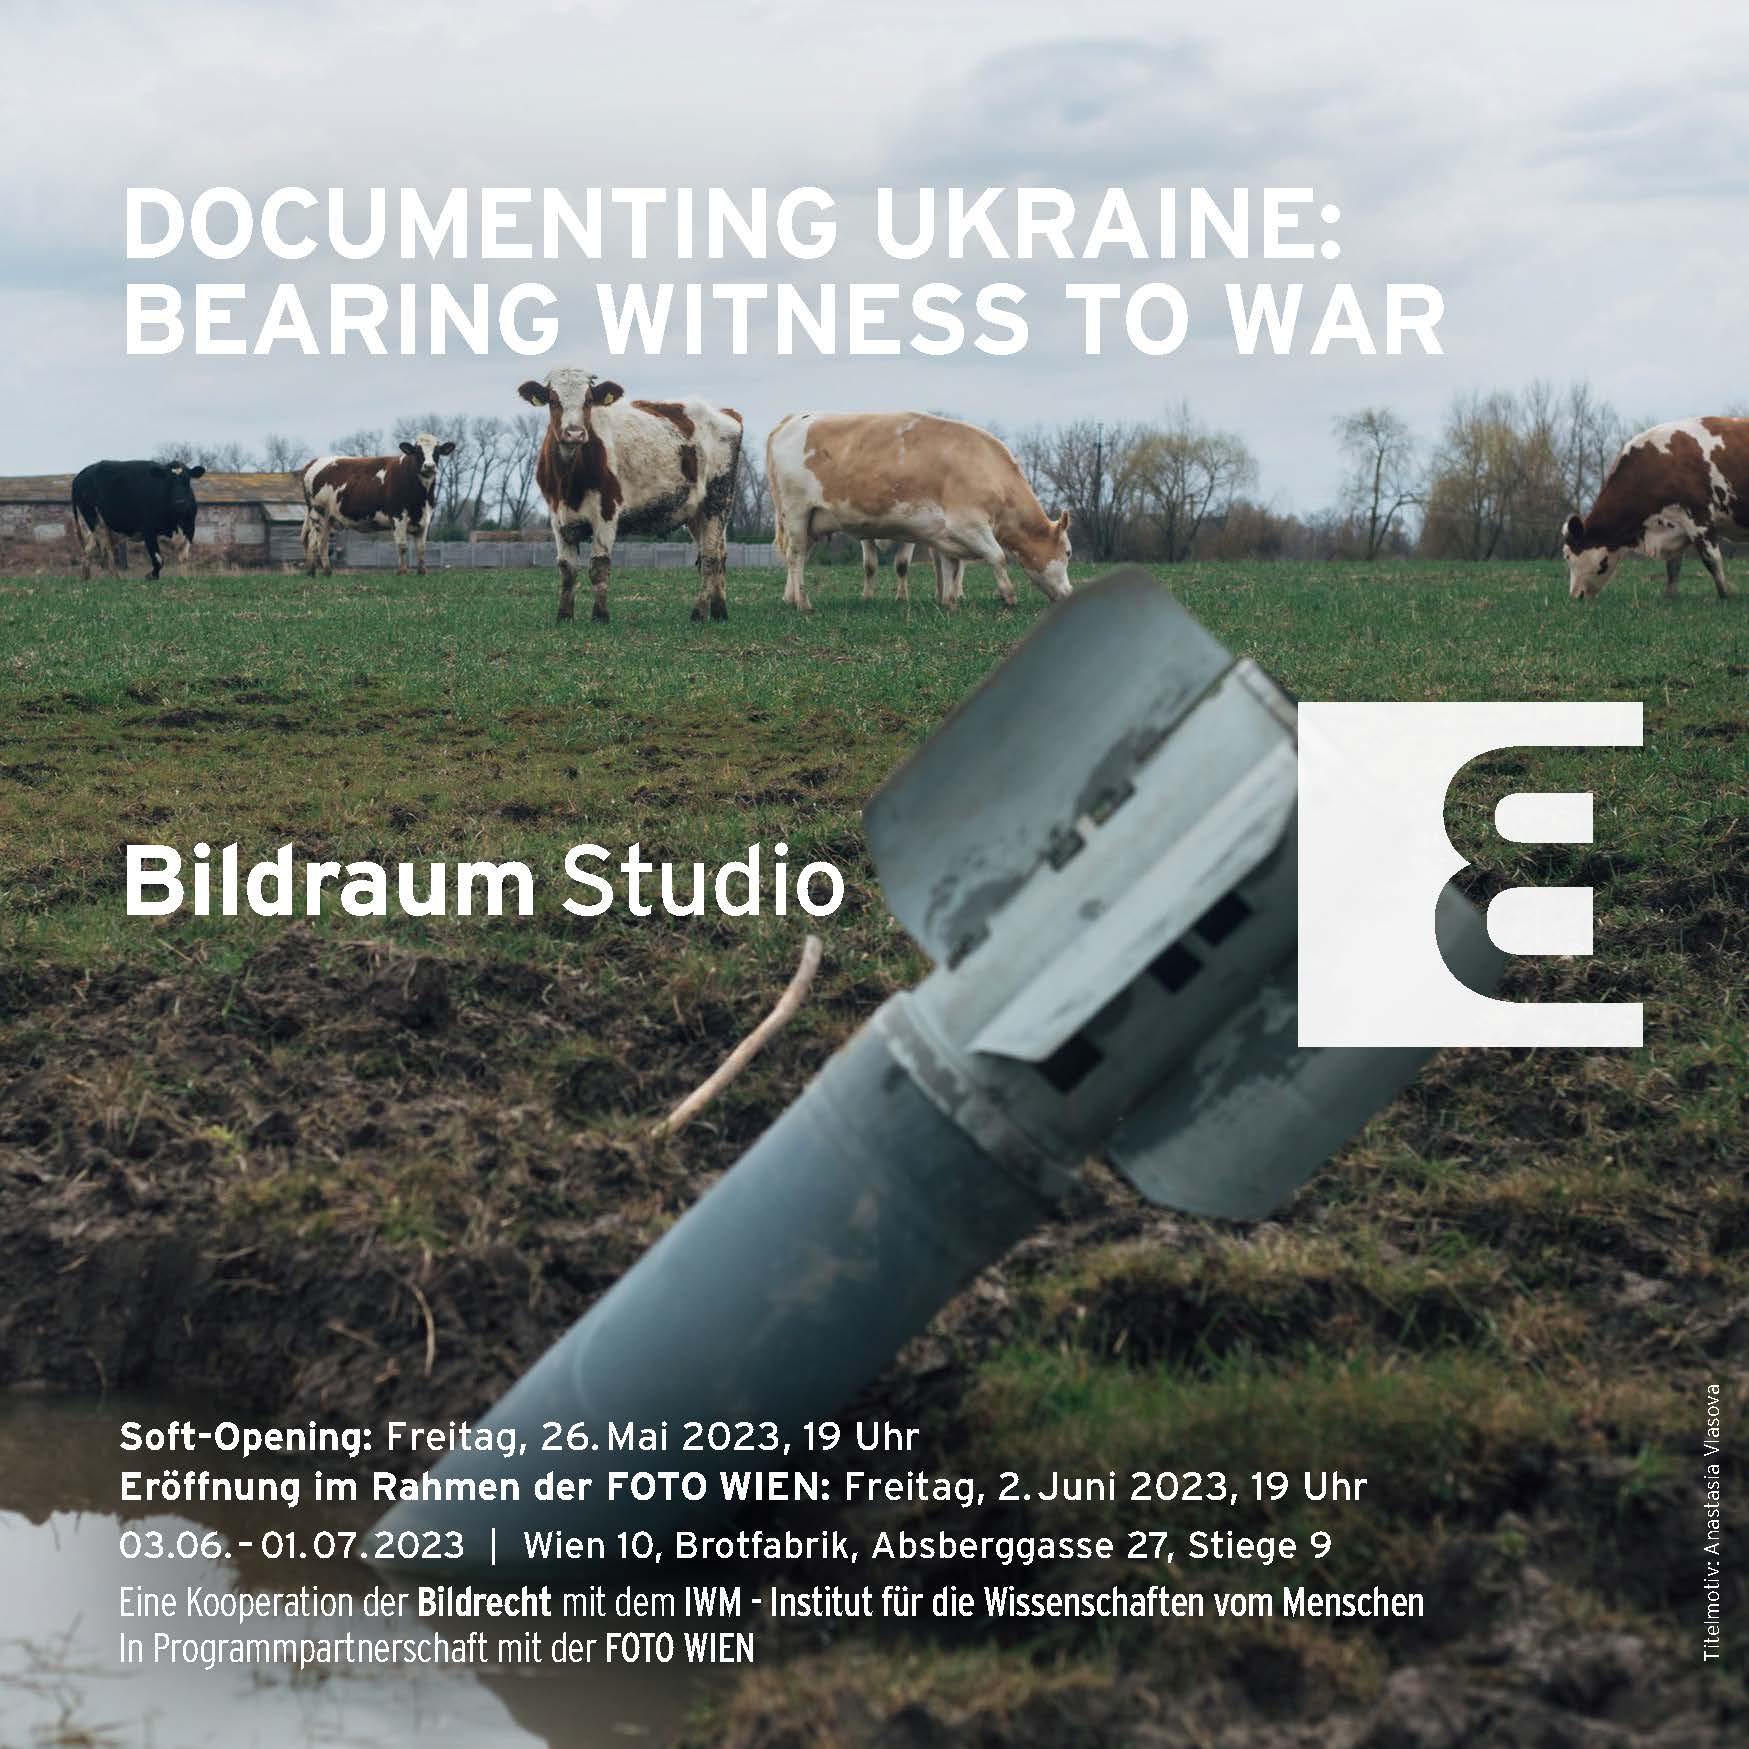 Flyer for the photo exhibition "Documenting Ukraine: Bearing Witness to War"